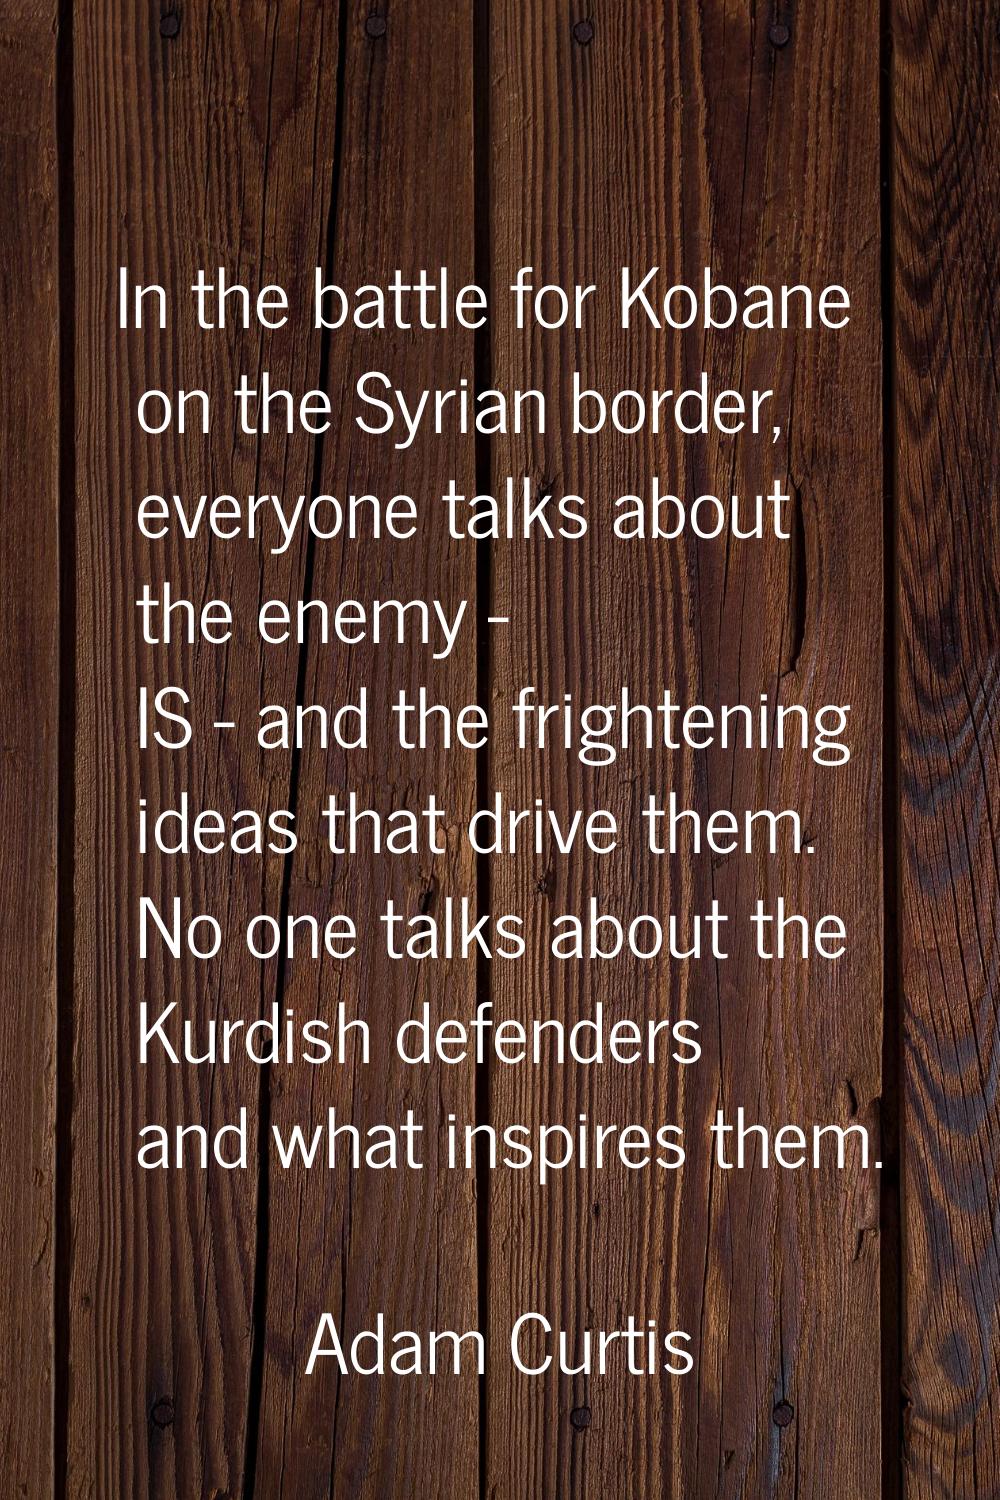 In the battle for Kobane on the Syrian border, everyone talks about the enemy - IS - and the fright